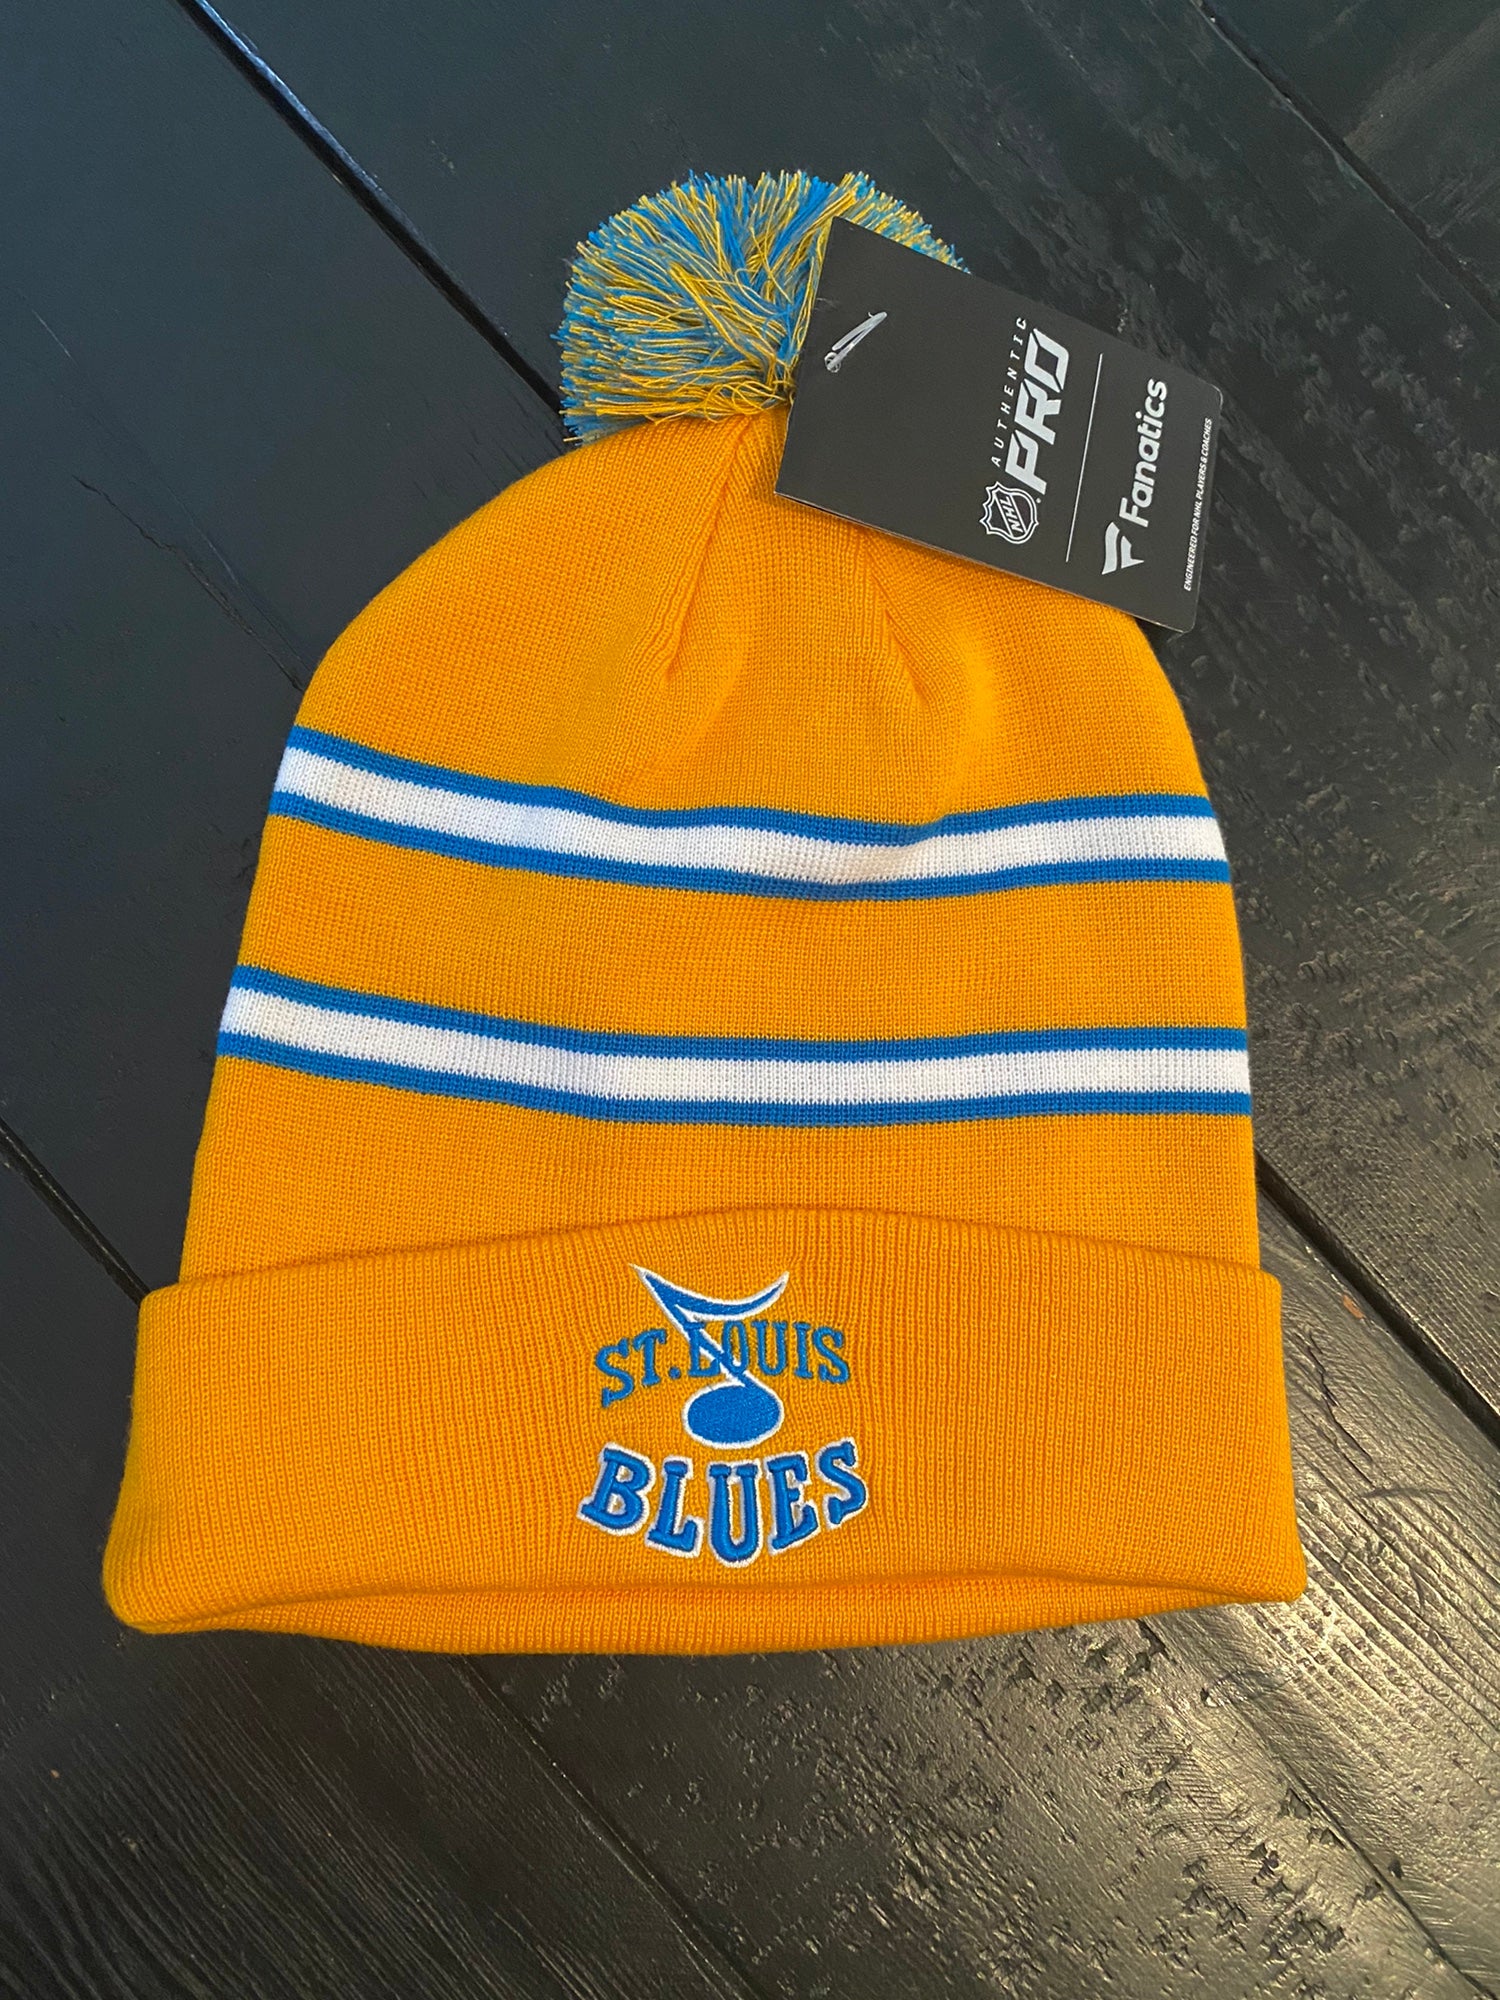 Vintage St. Louis Blues Hat Cap by The Game 7 3/8 Blue Yellow NHL Hockey  Fitted